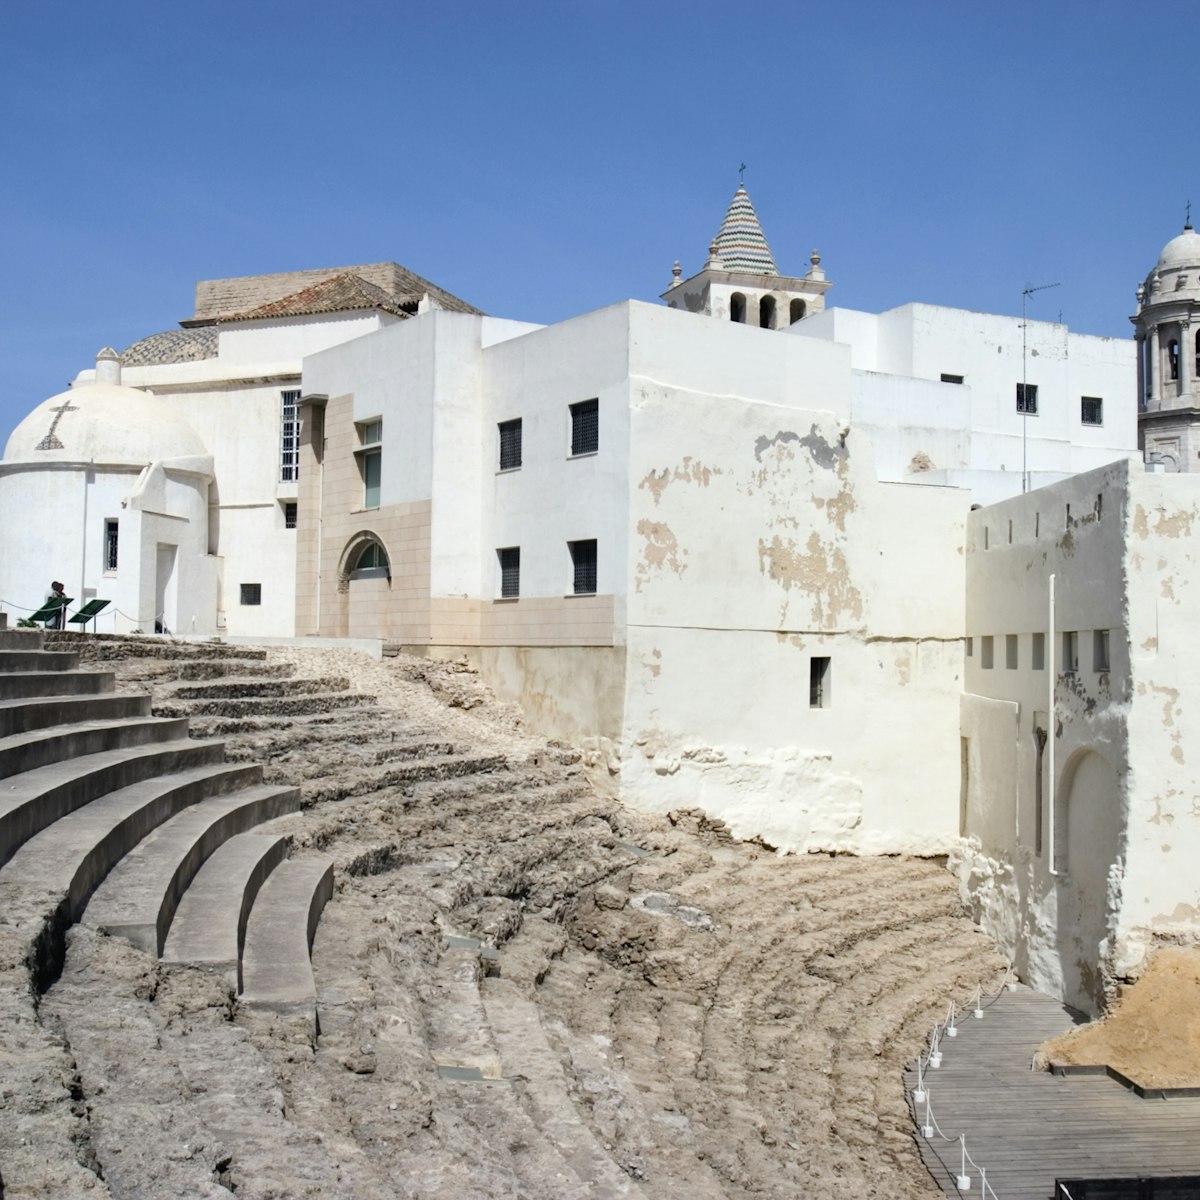 Cadiz, the oldest existing city in western Europe, is home to many beautiful and historic monuments and attractions. One of Cadiz's most famous landmarks is the Iglesia de Santa Cruz, the old cathedral. There is a well preserved Roman amphitheatre.